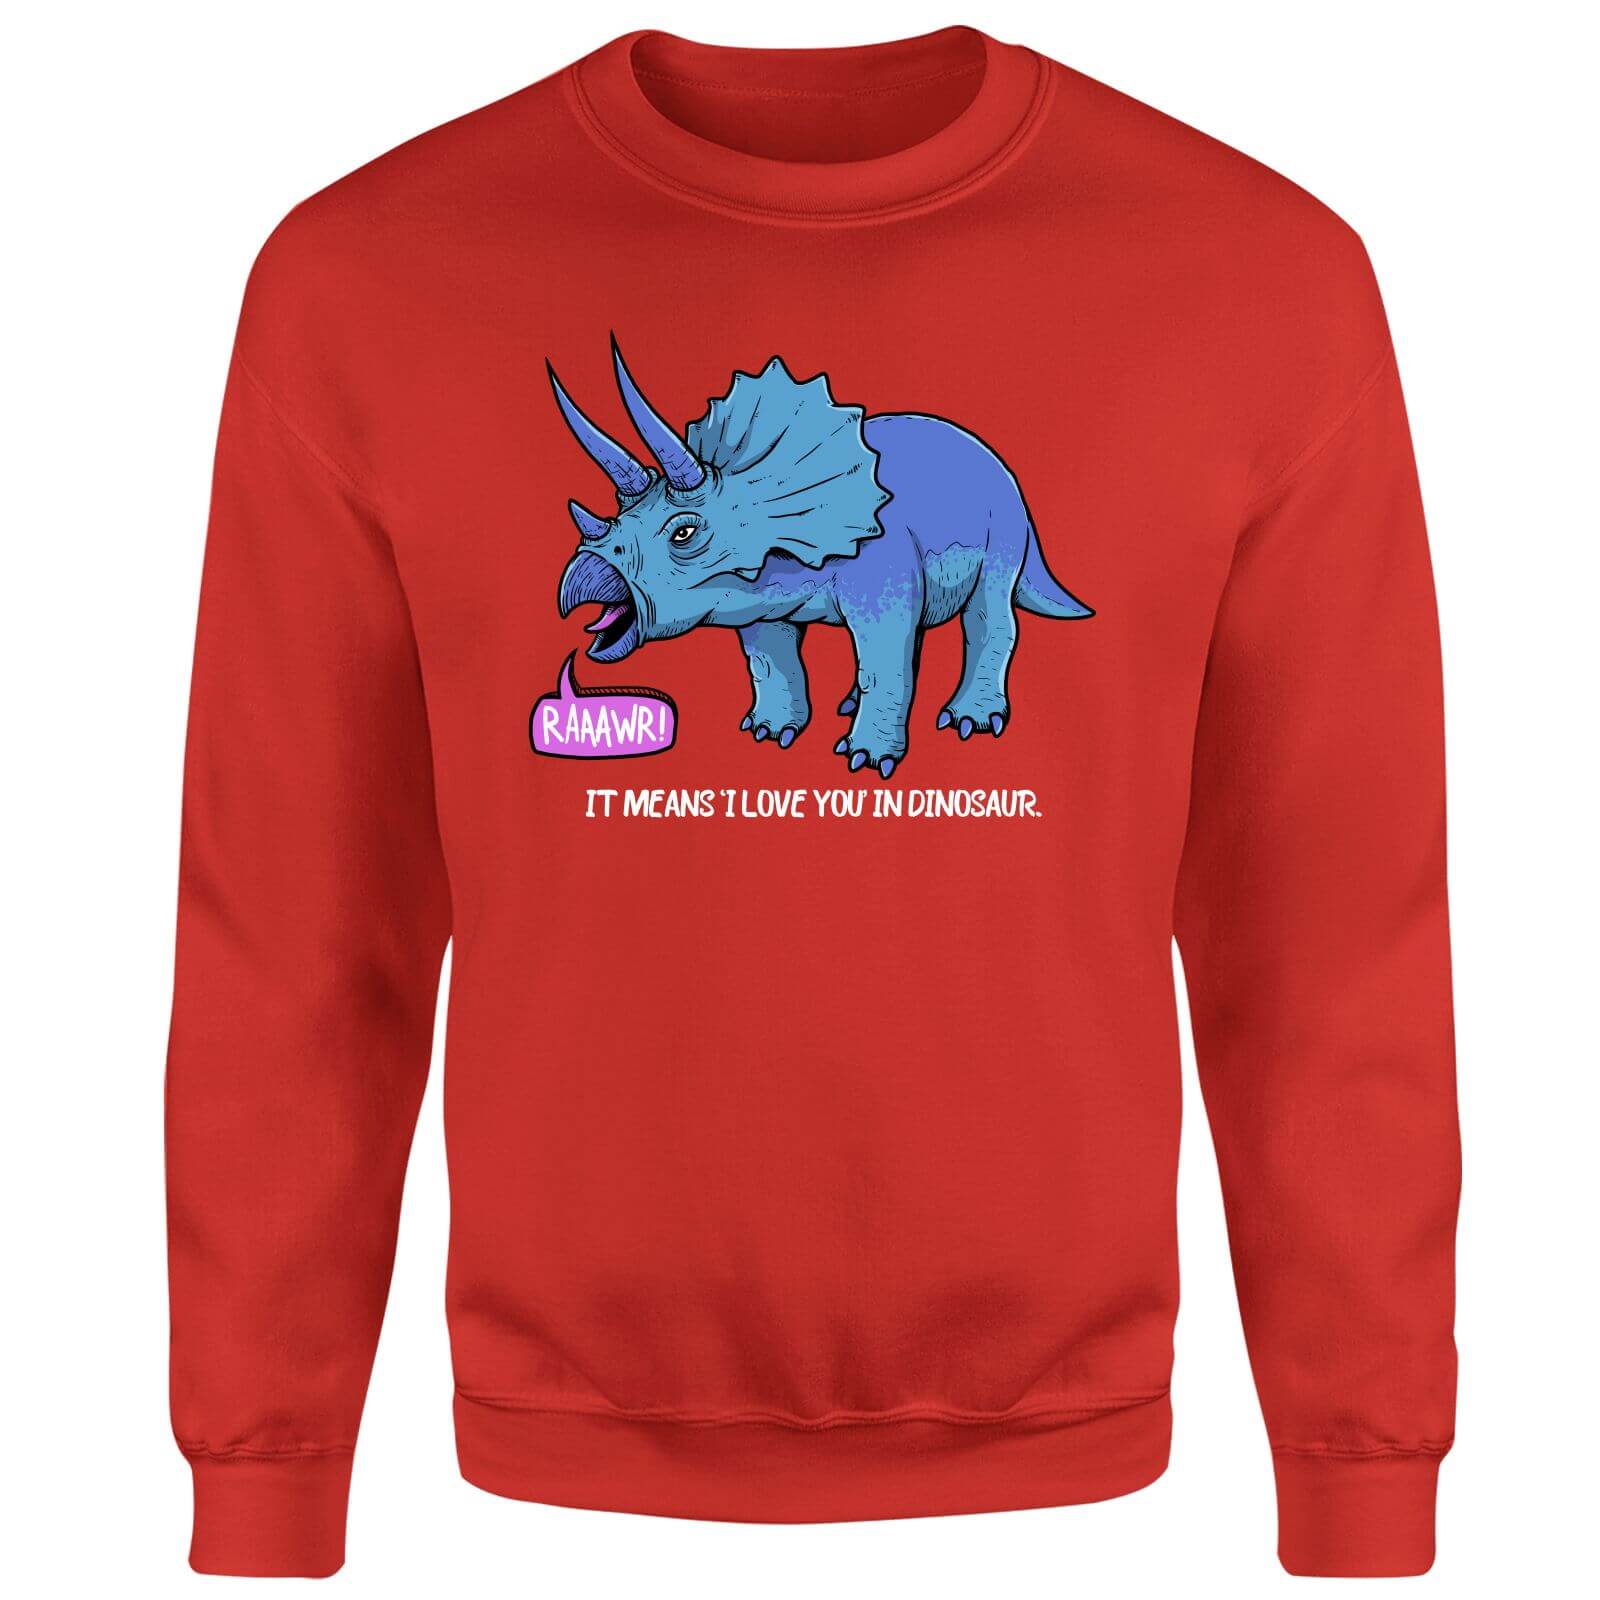 RAWR! It Means I Love You Sweatshirt - Red - M - Red